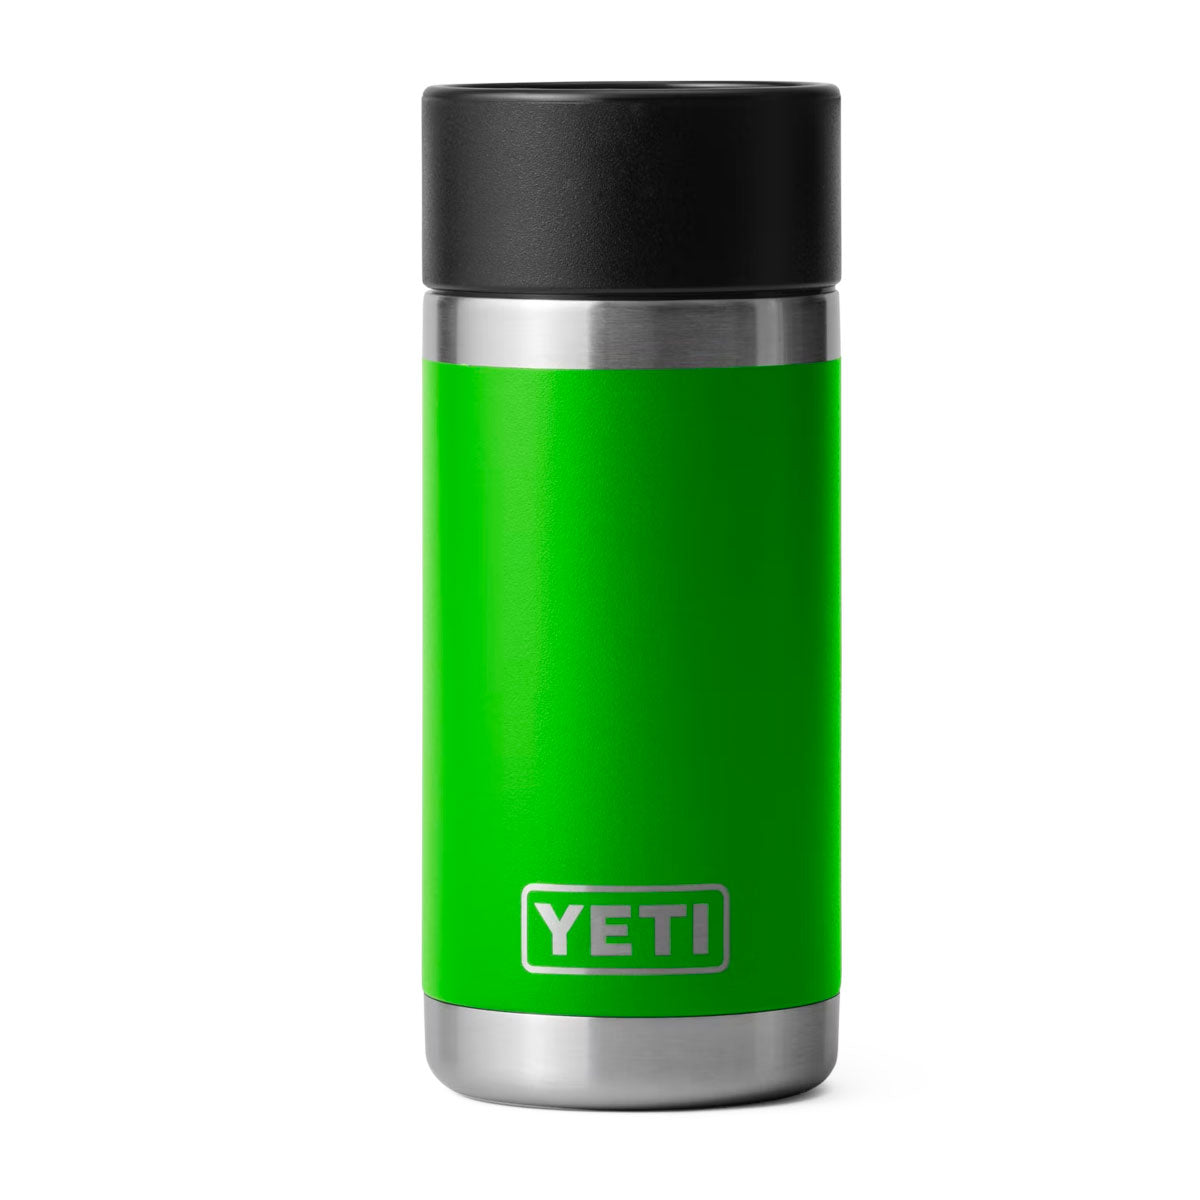  YETI Rambler 12 oz Bottle, Stainless Steel, Vacuum Insulated,  with Hot Shot Cap, Canopy Green: Home & Kitchen